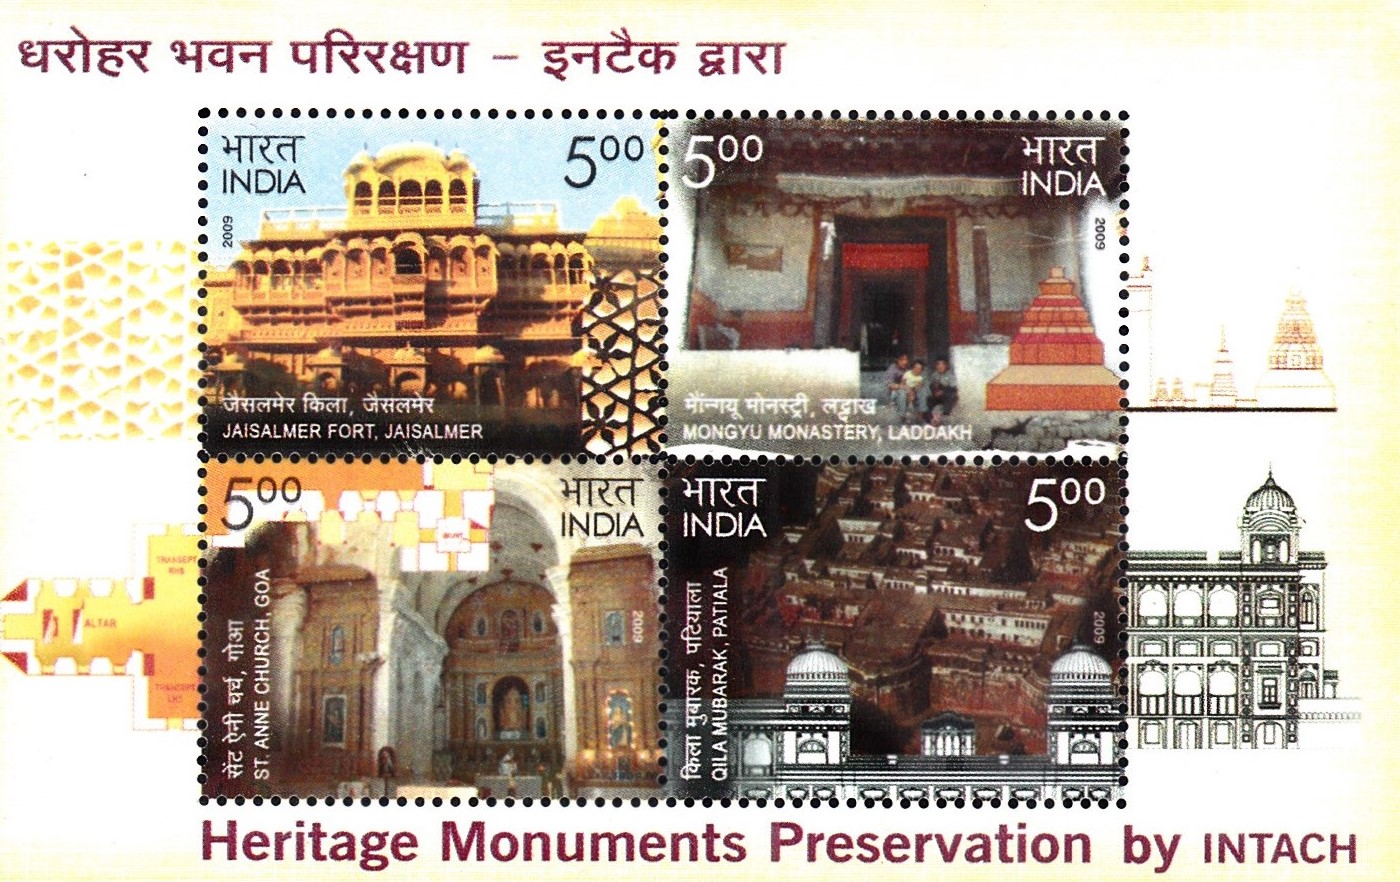  Heritage Monuments Preservation by INTACH